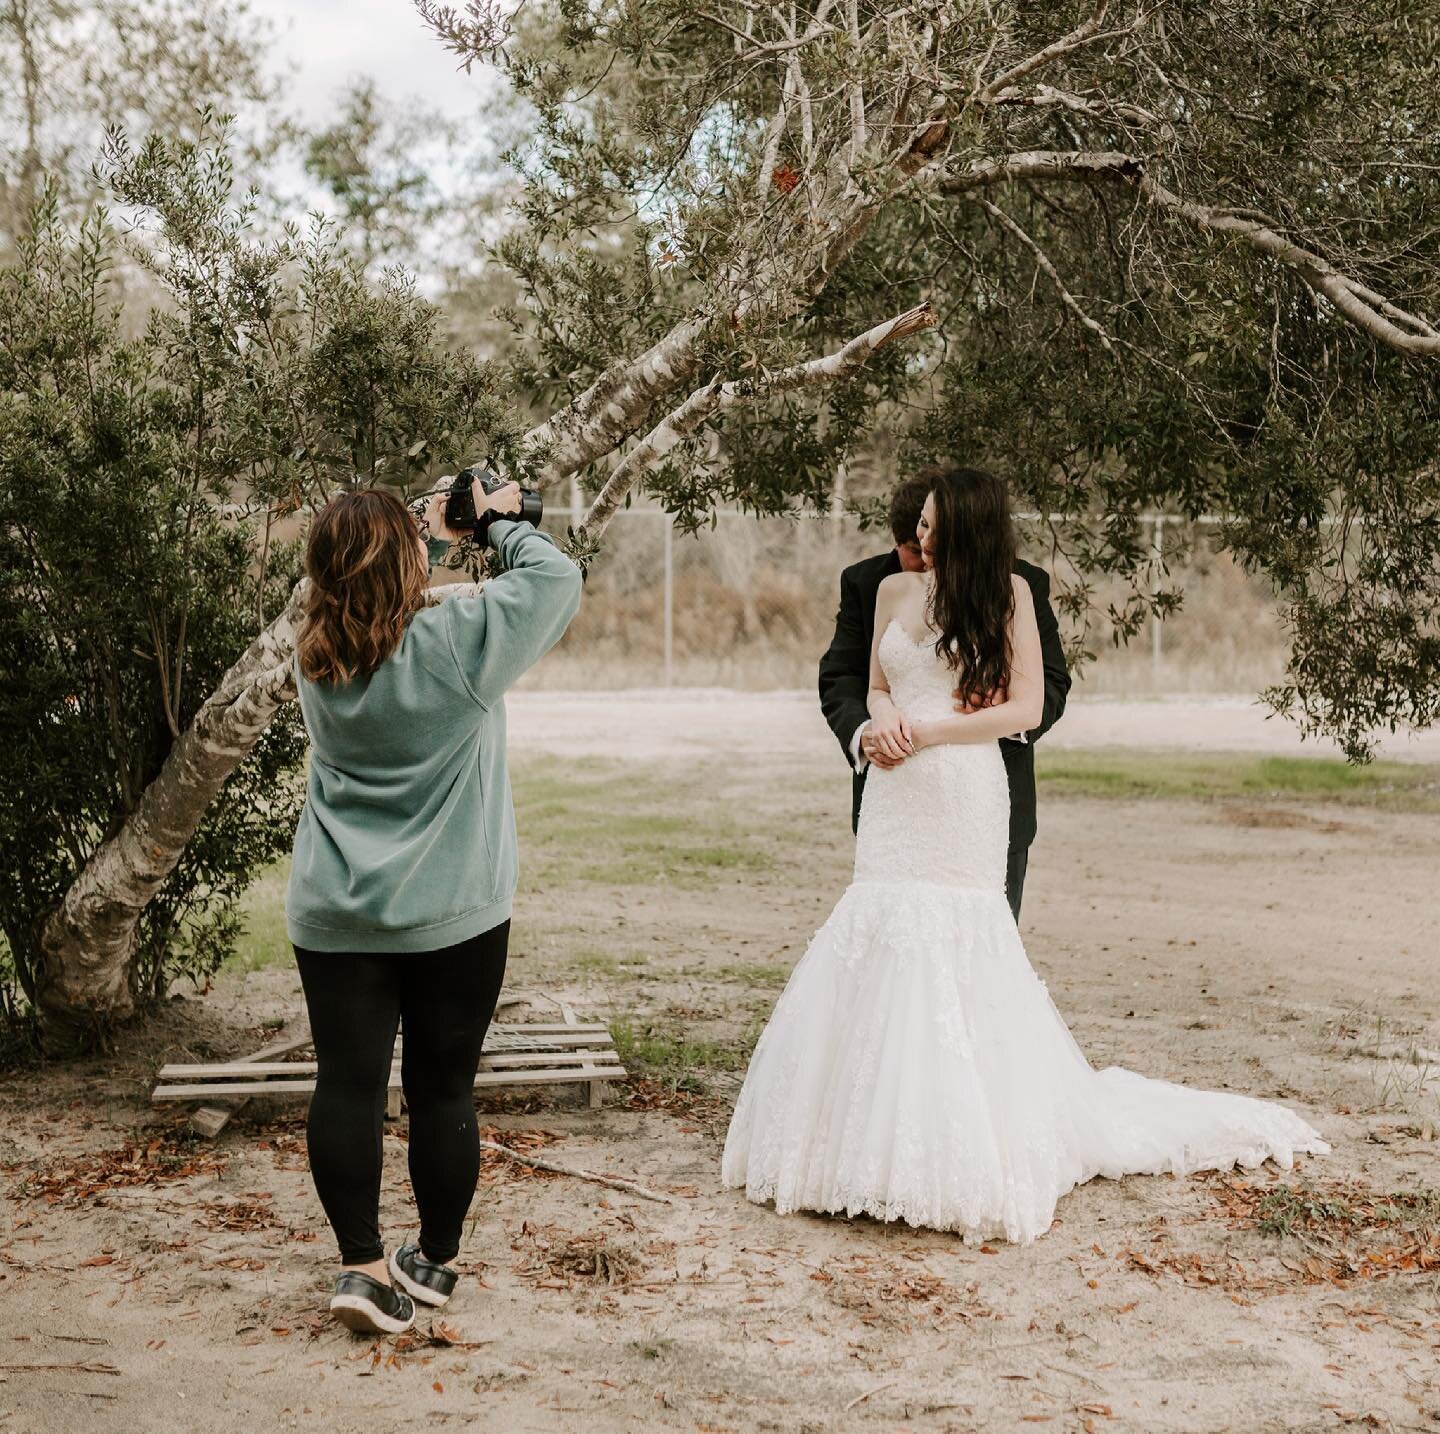 Happy Friday! I&rsquo;m currently on the road with my girl @courtniewelchphoto getting ready to photograph a wedding down near Gulf Shores! Gimme that beach and 70 degree sunshine 🙌🏻.

To think that it all started with this sweet wedding in 2019! E